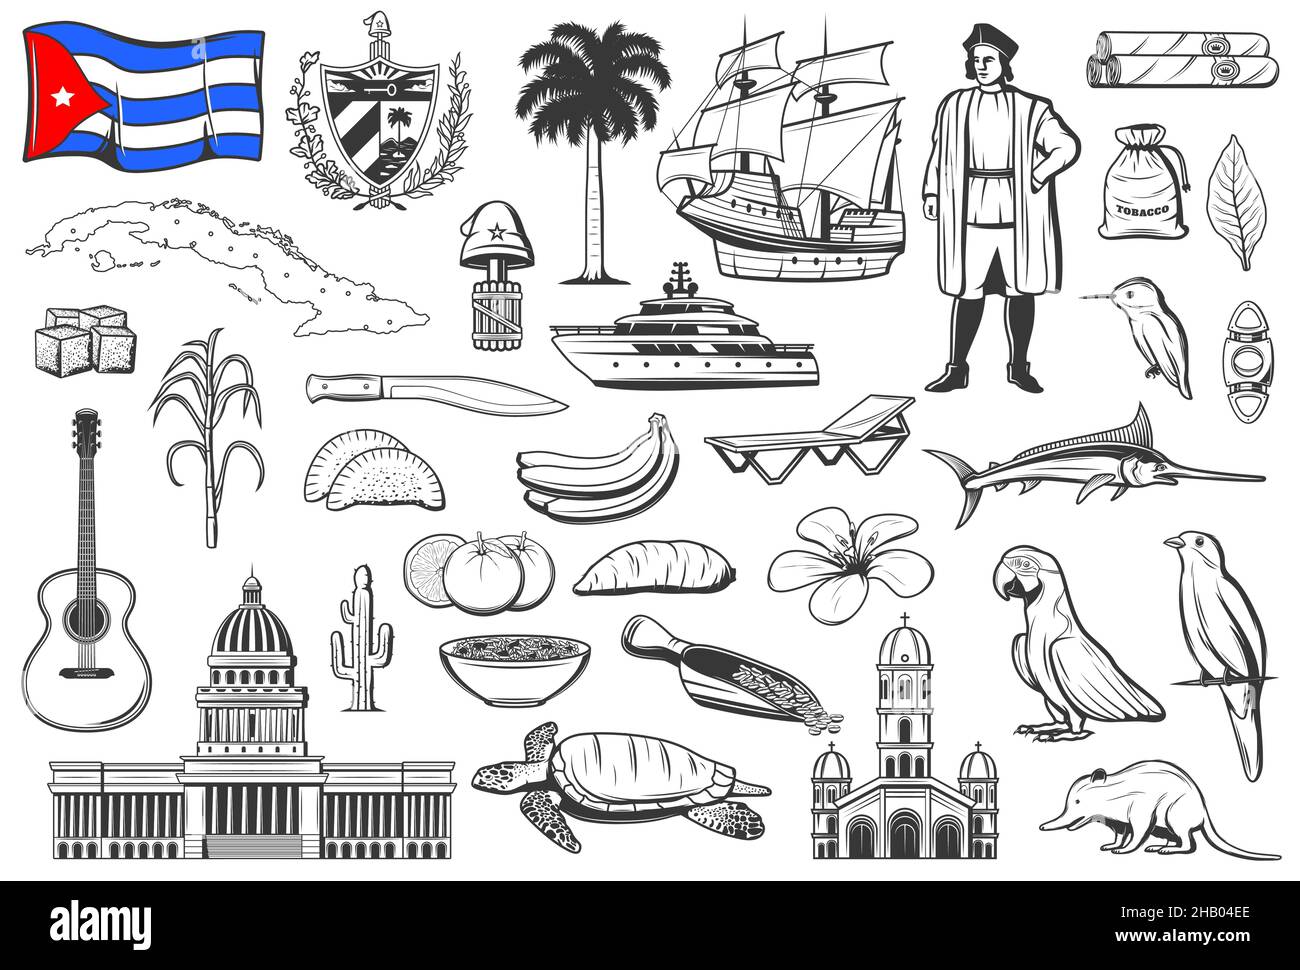 Cuba national symbols, cuisine and nature engraved icons set. Cuban flag and Coat of Arms, capitol building and island map, Christopher Columbus ship, Stock Vector